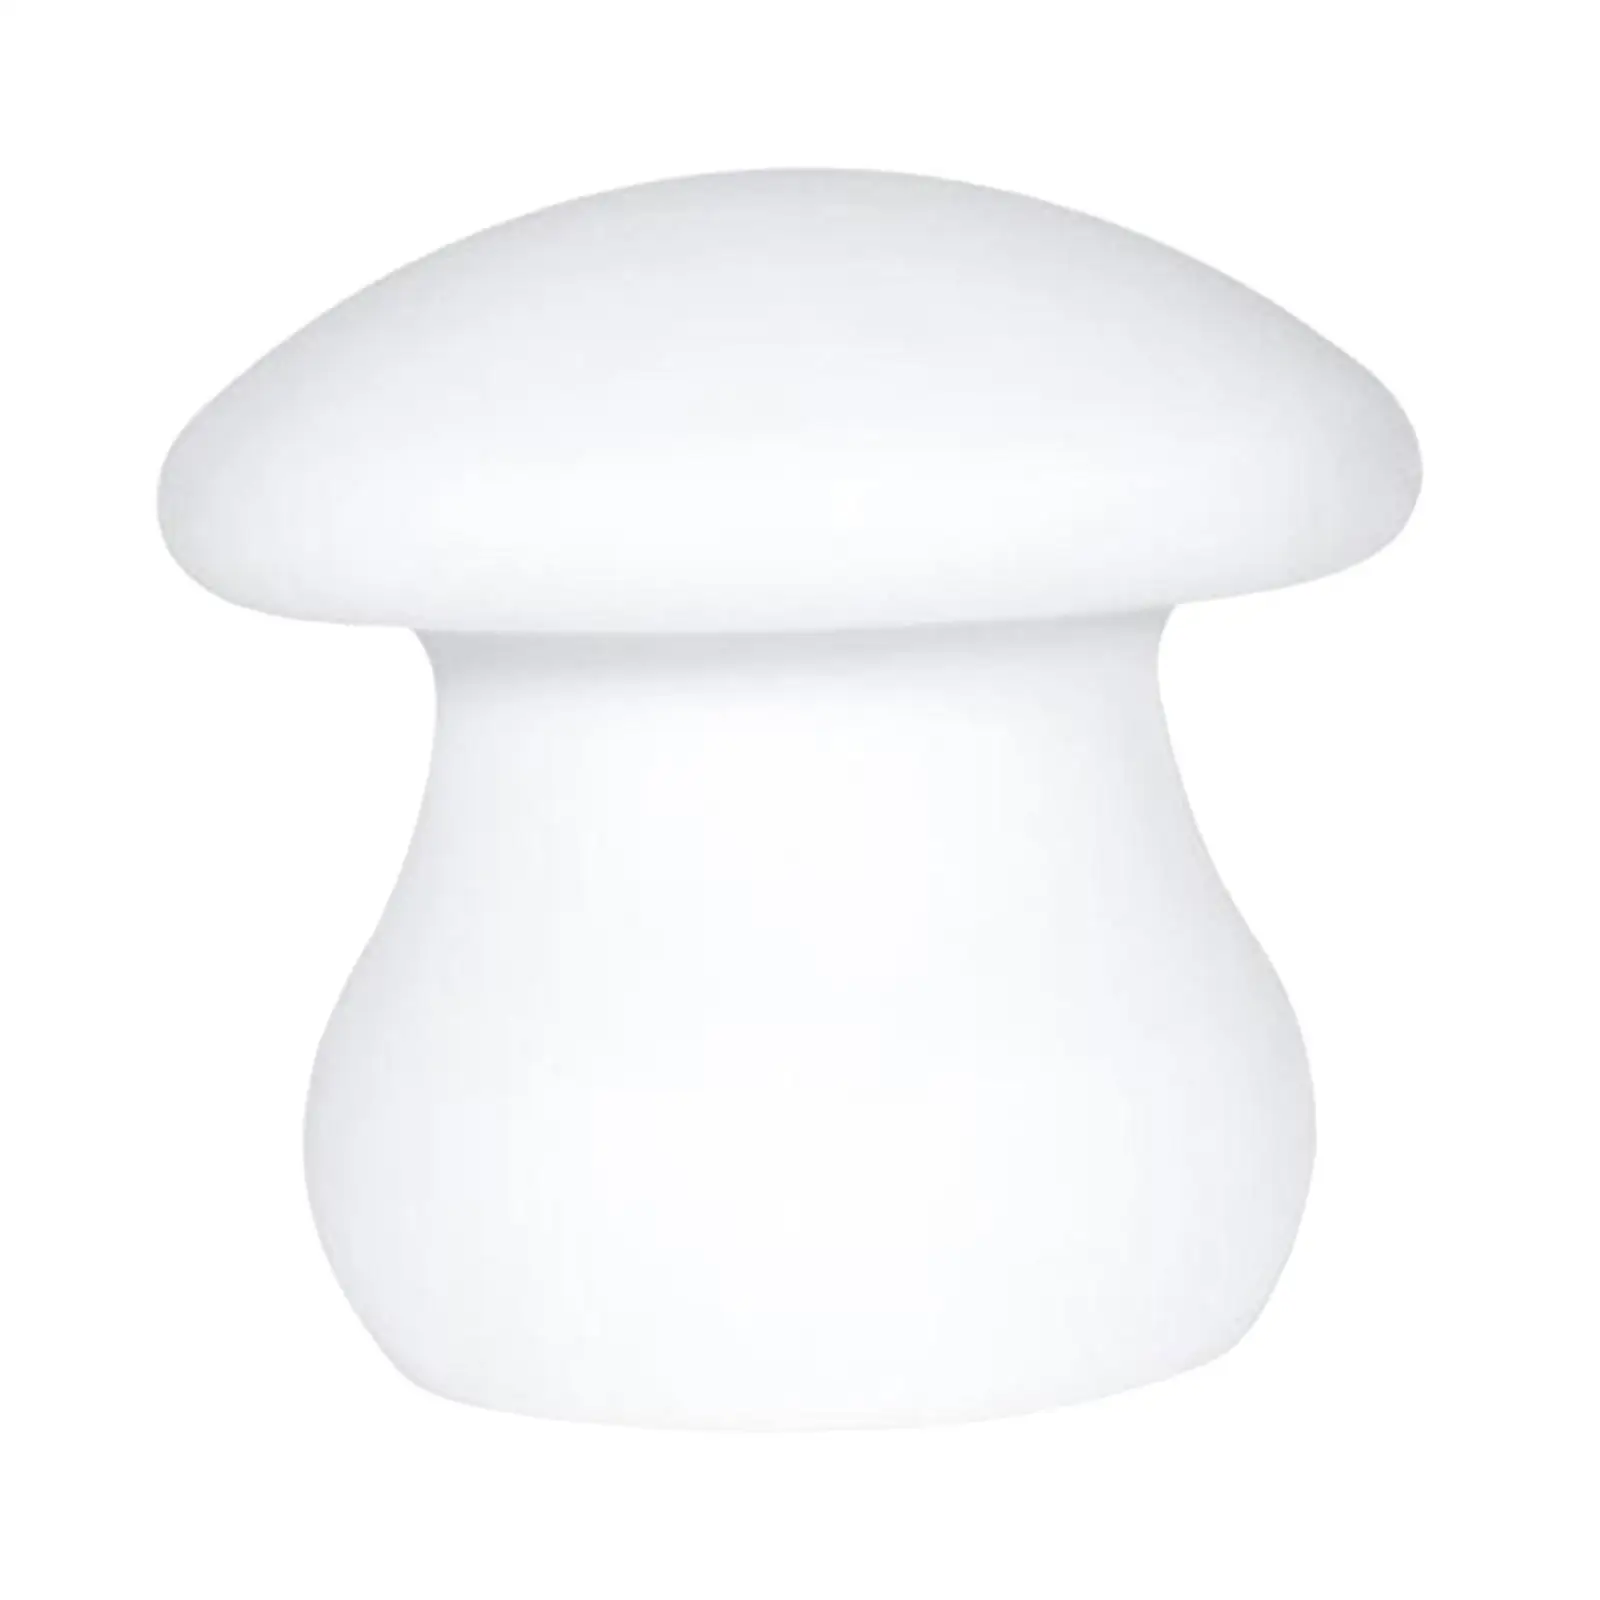 Cute Light Table Centerpiece Atmosphere Light for Party Study Room Cafe